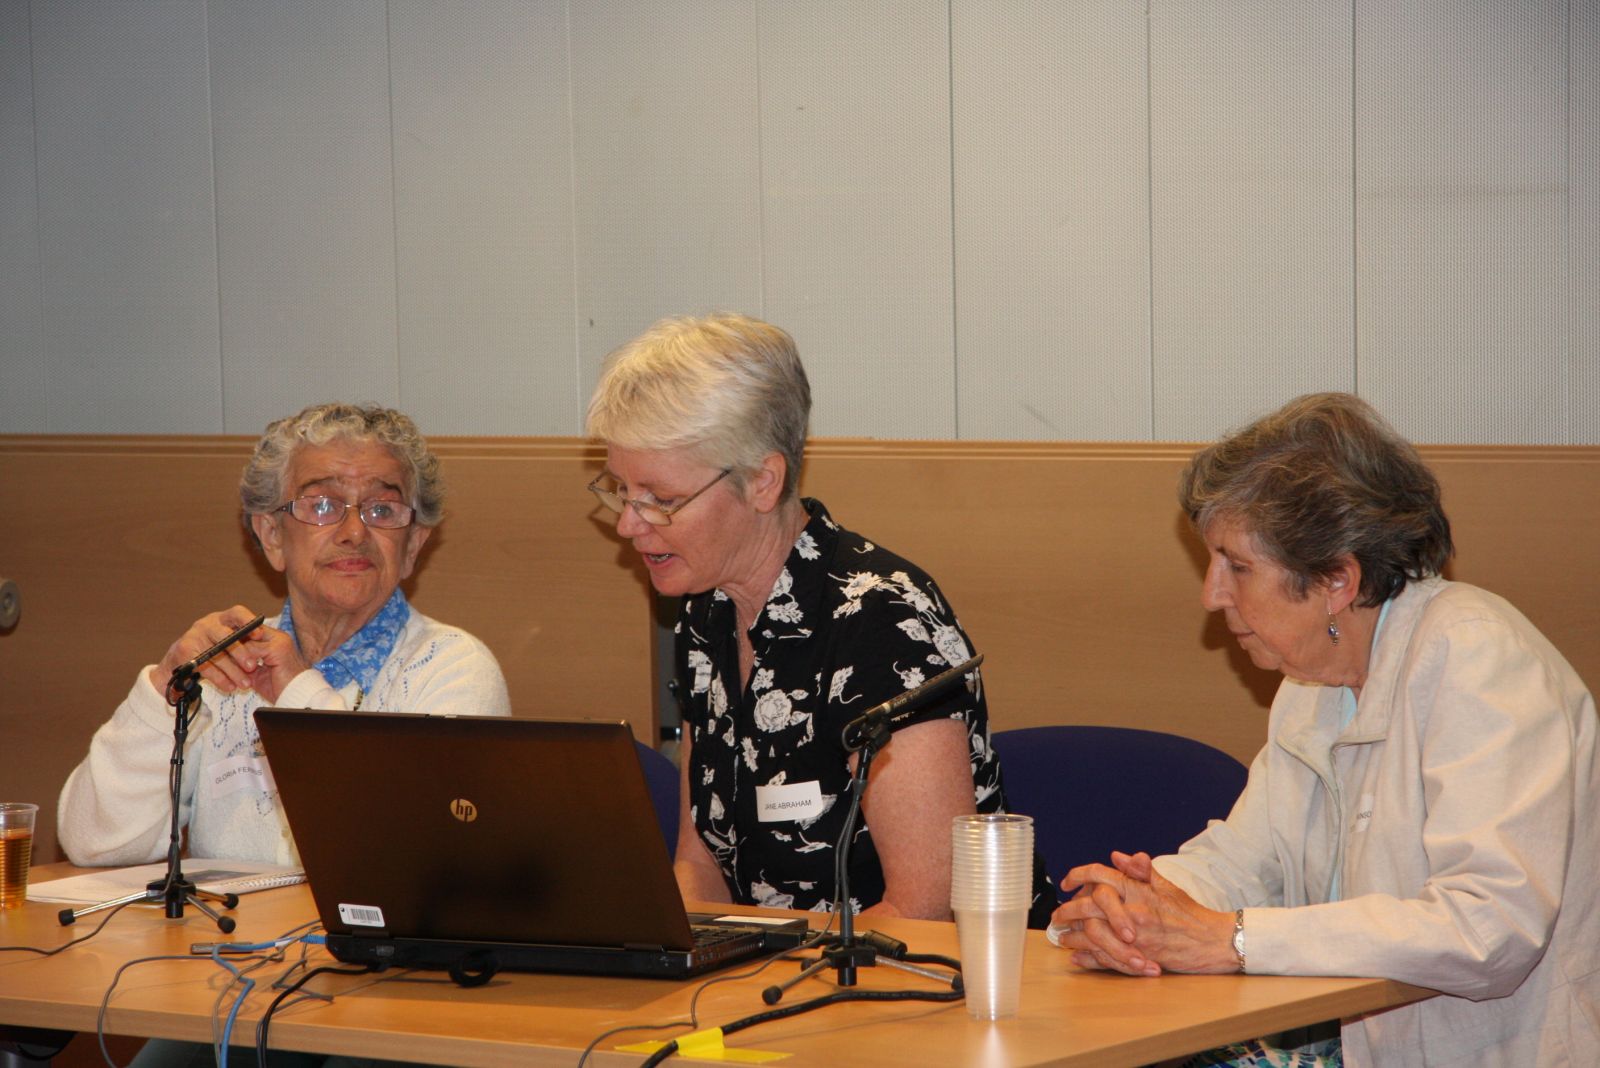 Gloria Ferris, Dorothy Atkinson and Jane Abraham at the 2013 conference